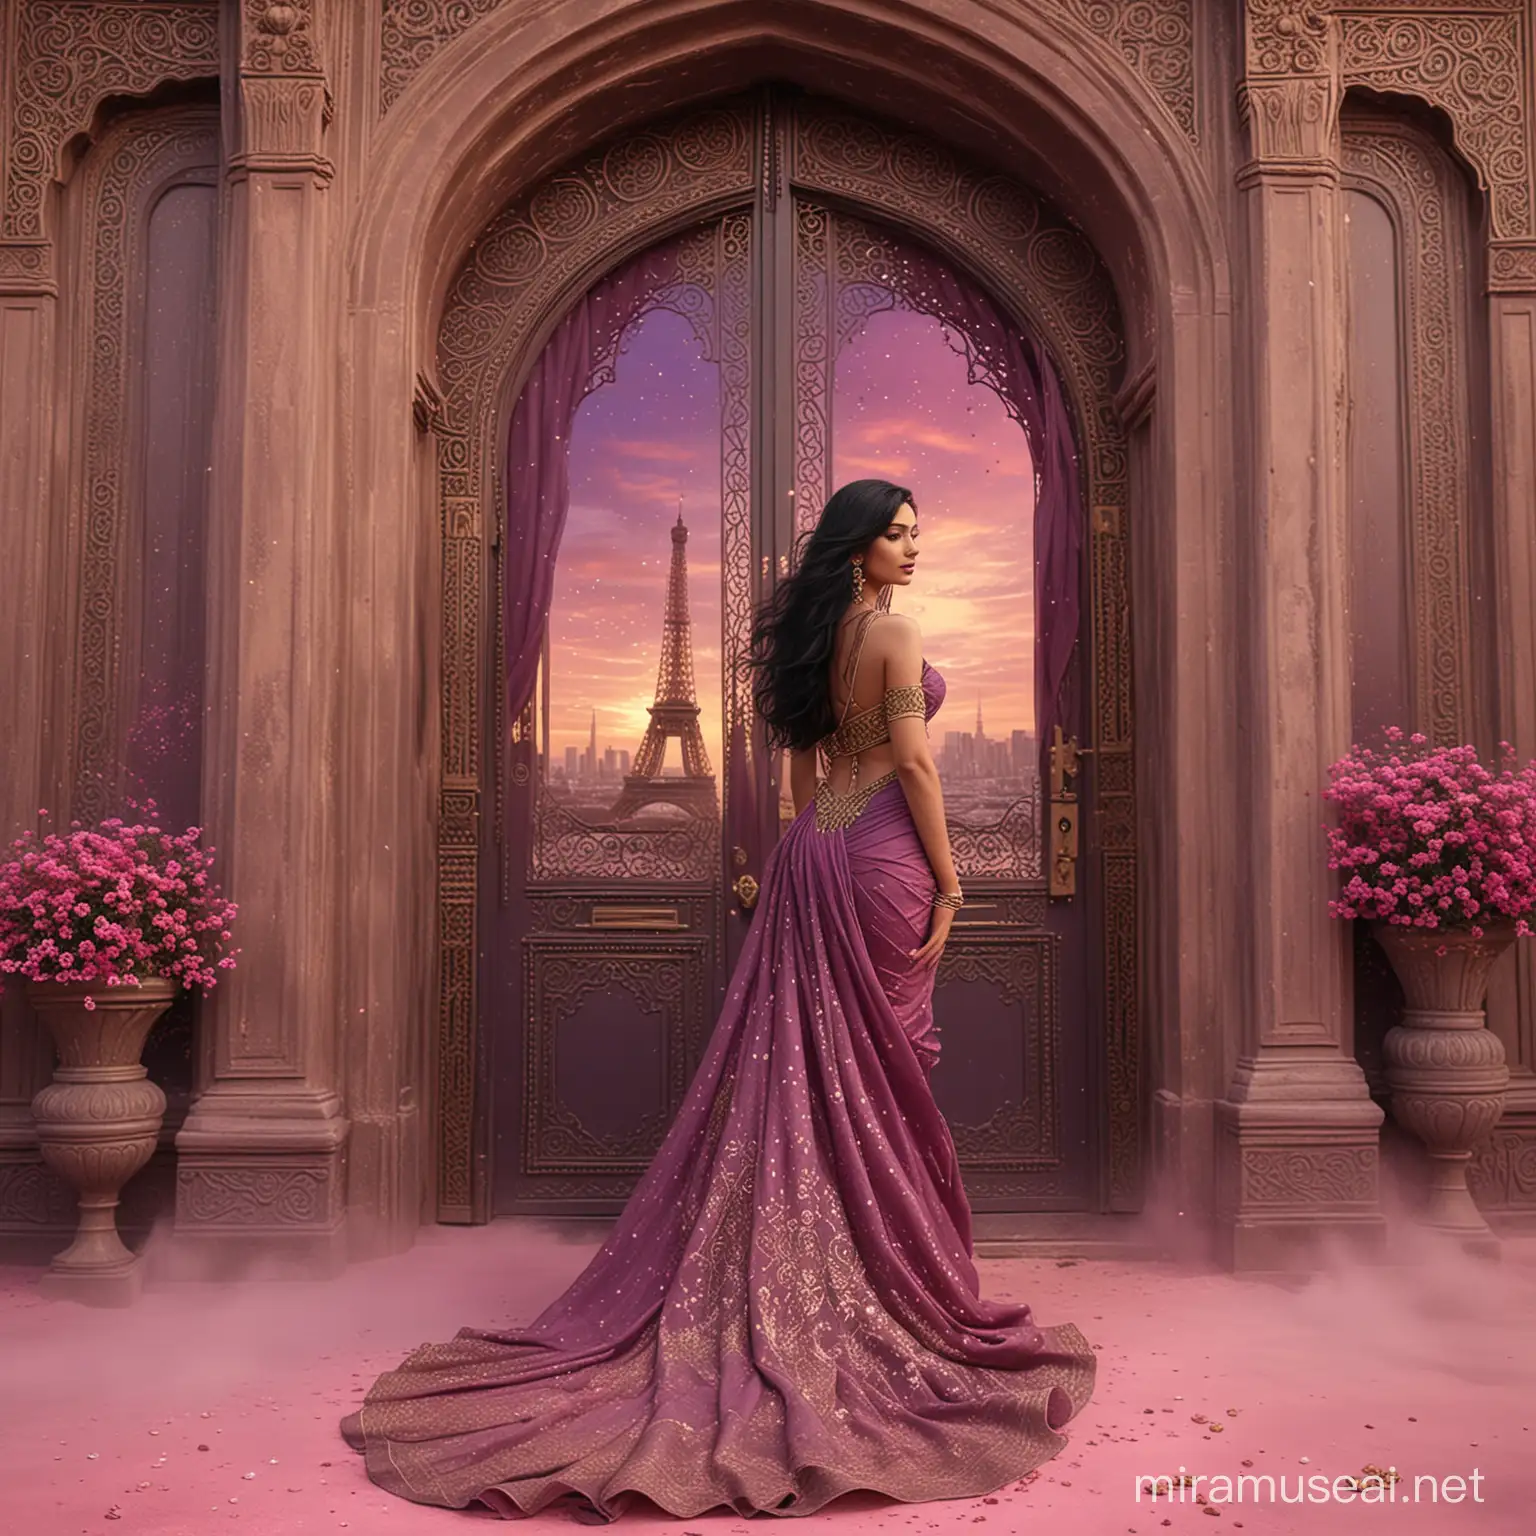 Enigmatic Woman Enchanted by Fairy Whispers under Dark Pink Sky